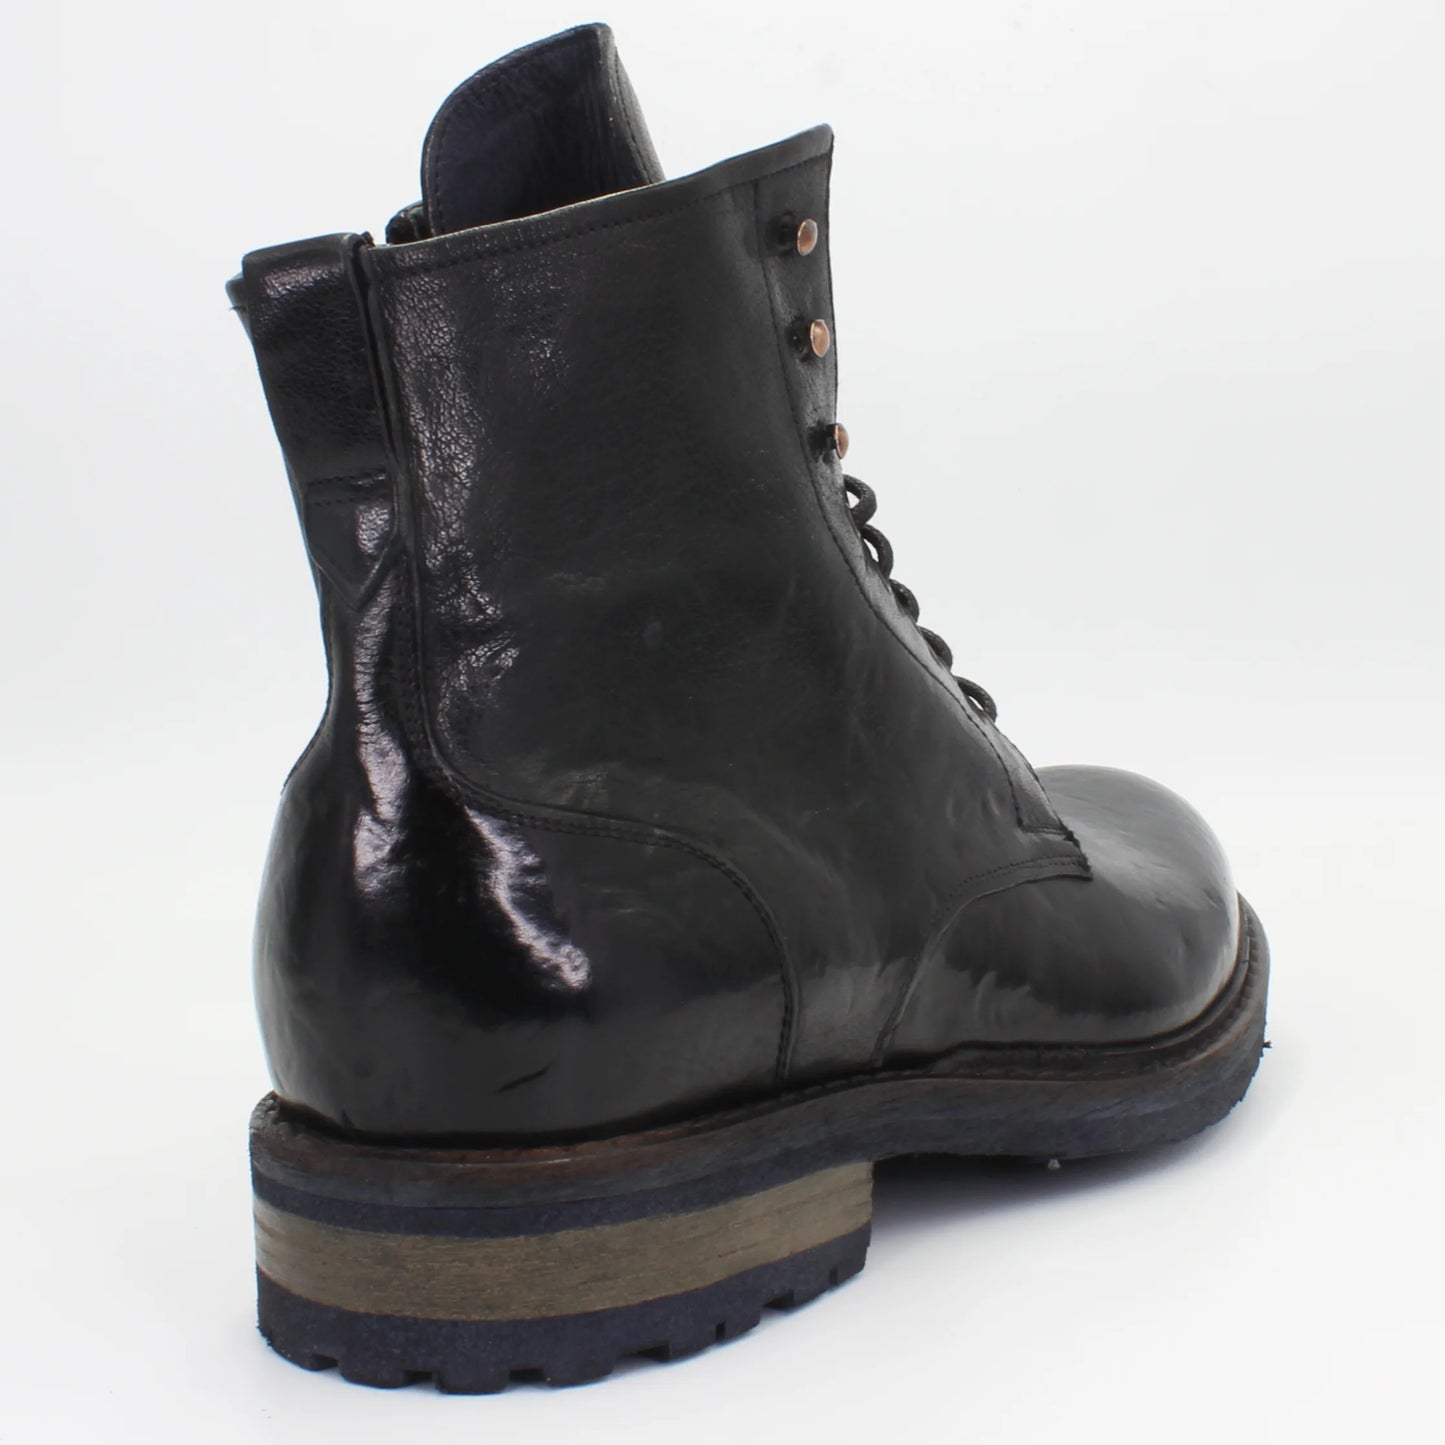 Shop Handmade Italian Leather Boot in Nero (BRU10886) or browse our range of hand-made Italian boots for men in leather or suede in-store at Aliverti Cape Town, or shop online. We deliver in South Africa & offer multiple payment plans as well as accept multiple safe & secure payment methods.